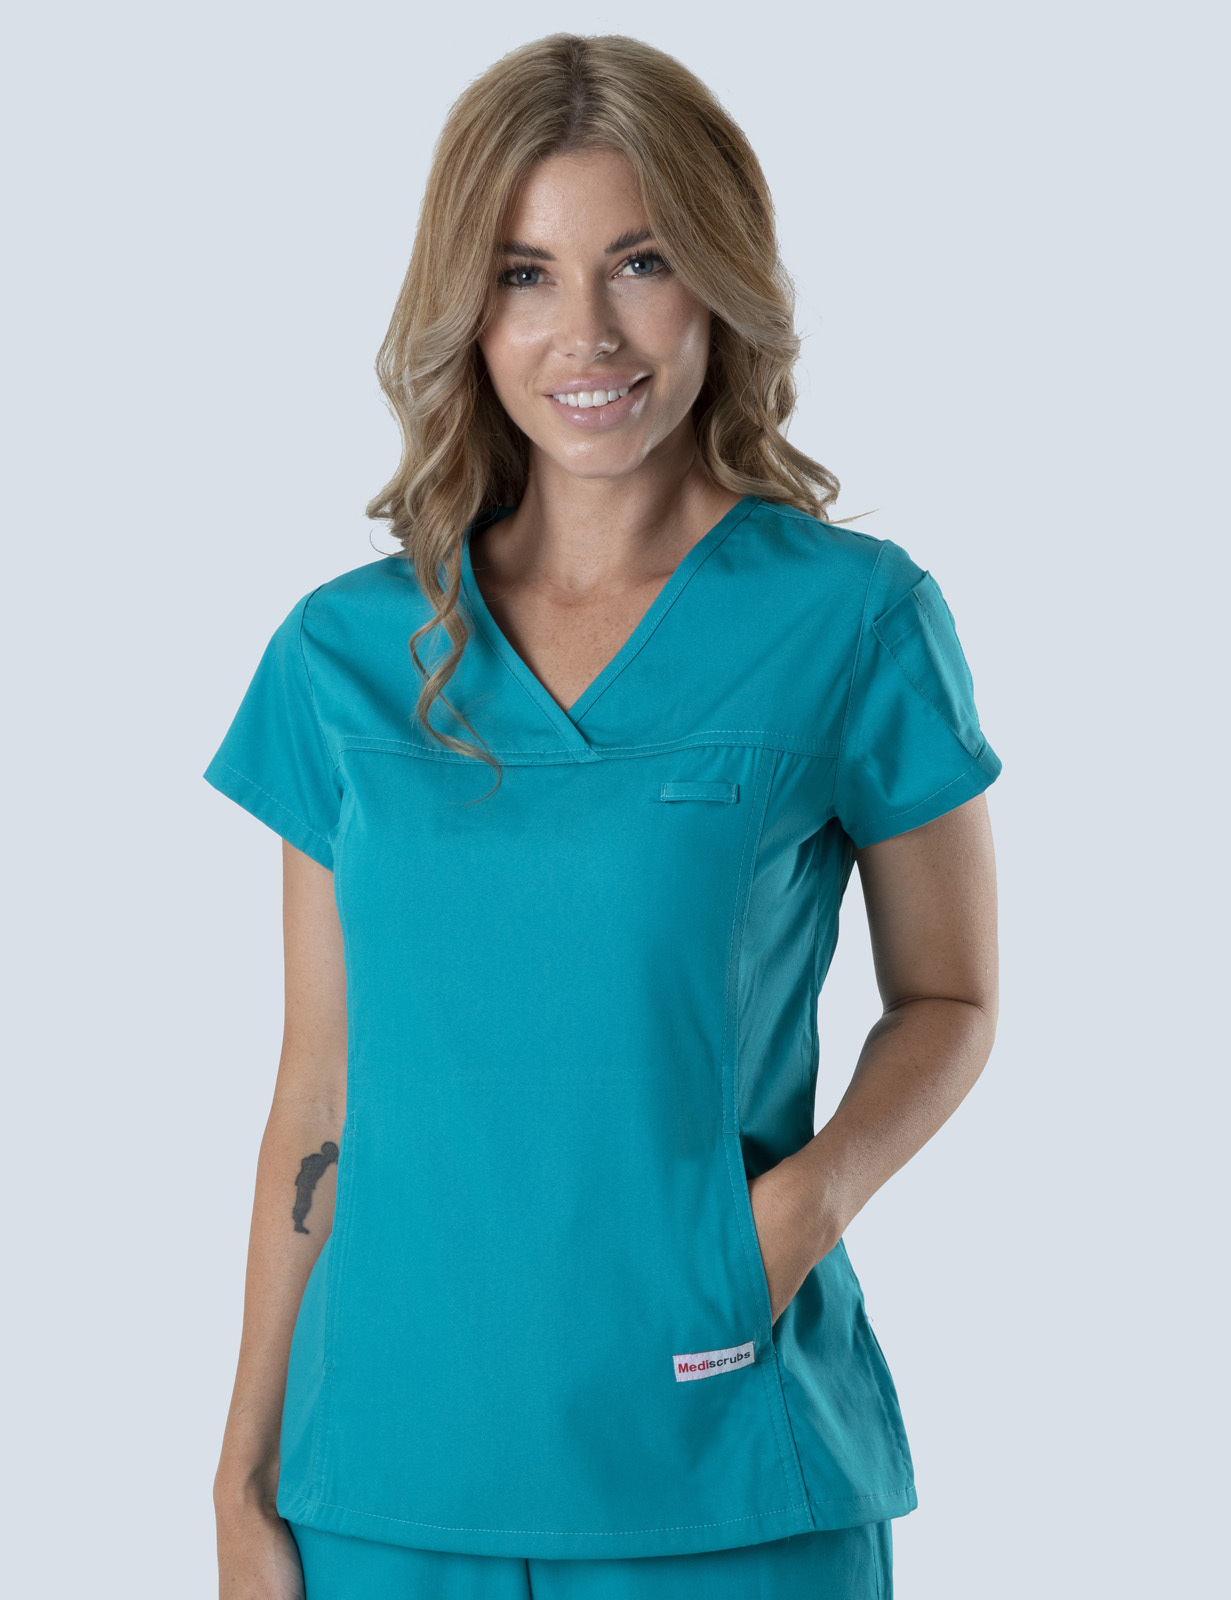 Caboolture Hospital - ICU AIN (Women's Fit Solid Scrub Top in Teal incl Logos)